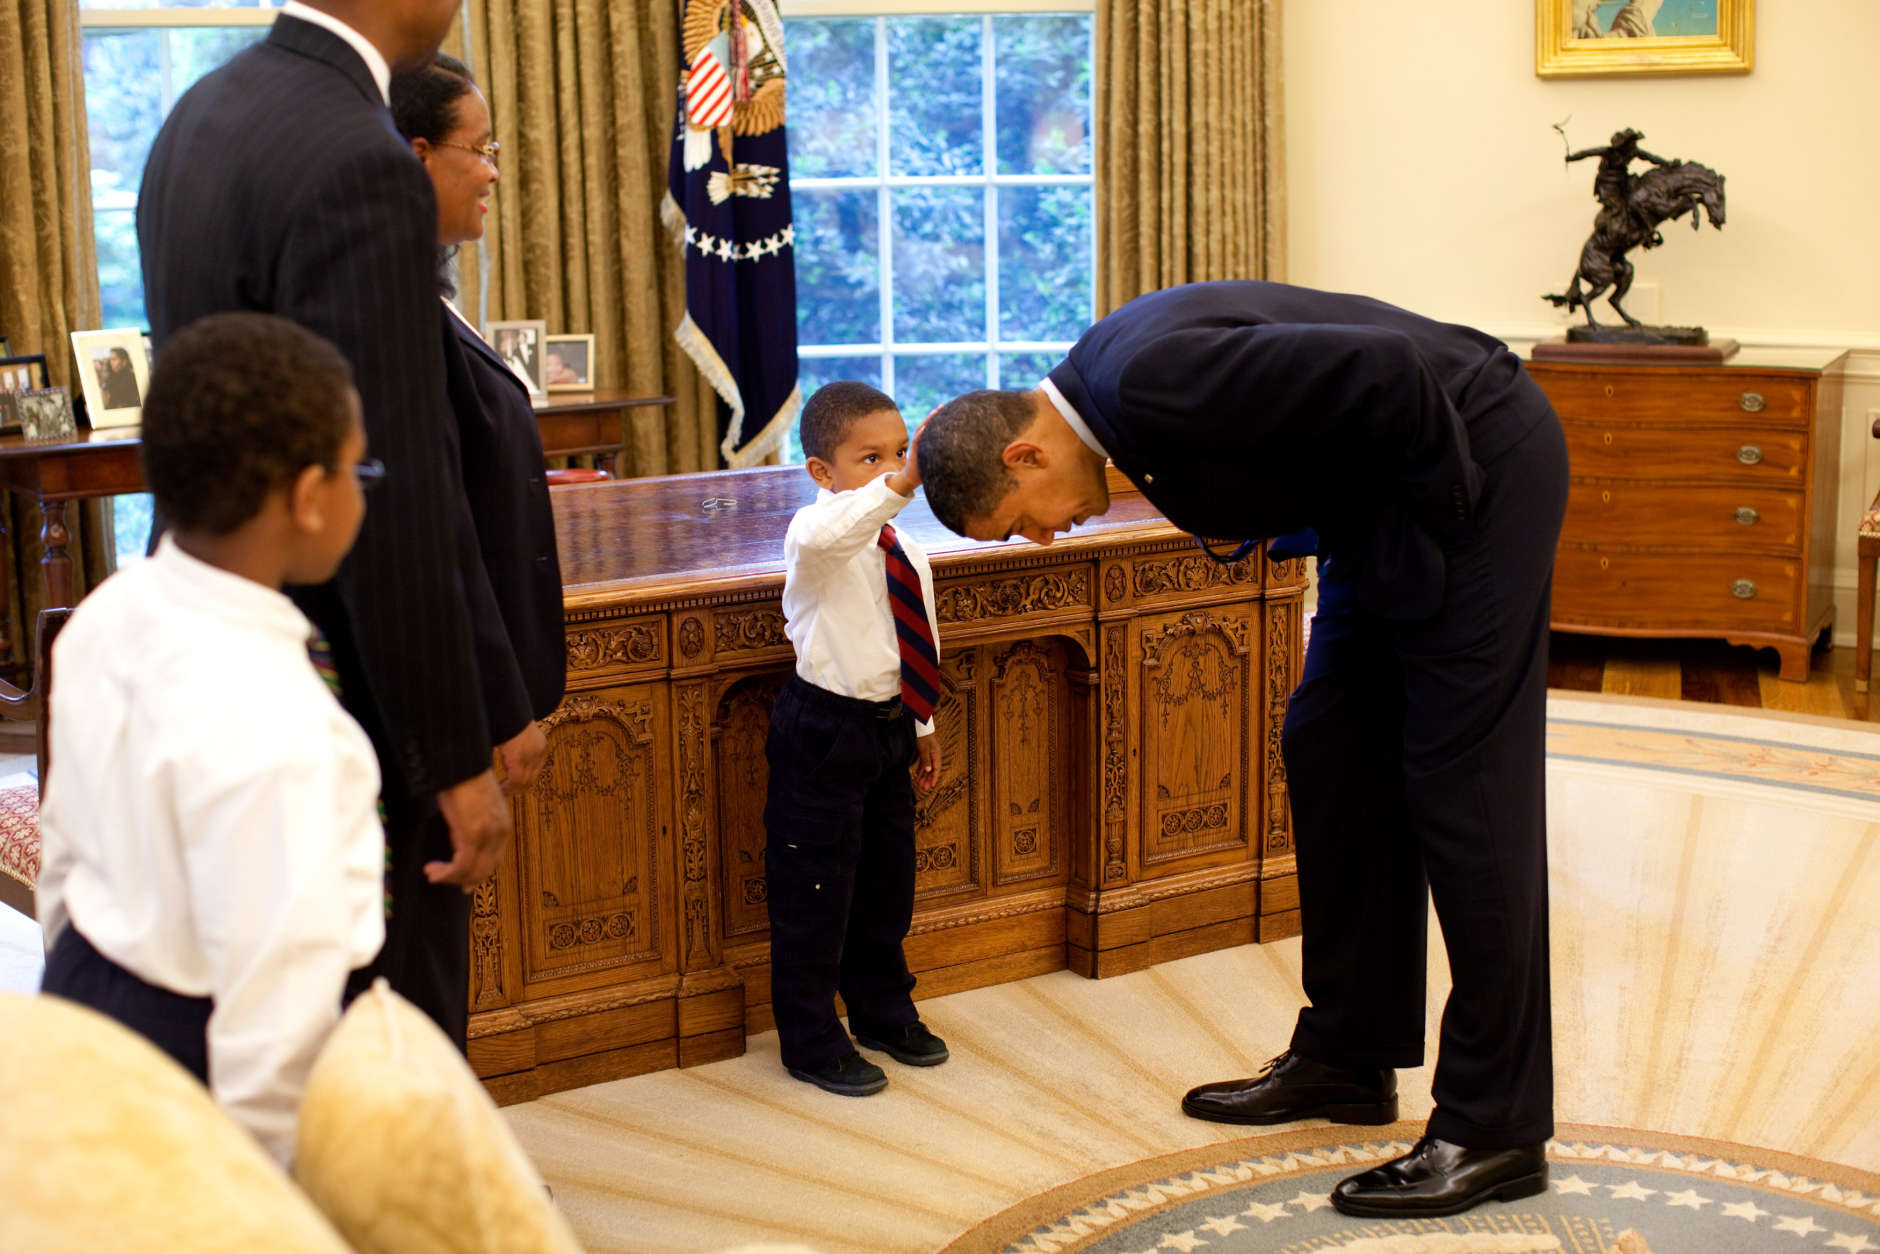 President Barack Obama bends over so the son of a White House staff member can pat his head during a visit to the Oval Office May 8, 2009.  Official White House Photo by Pete Souza.  This official White House photograph is being made available for publication by news organizations and/or for personal use printing by the subject(s) of the photograph. The photograph may not be manipulated in any way or used in materials, advertisements, products, or promotions that in any way suggest approval or endorsement of the President, the First Family, or the White House.